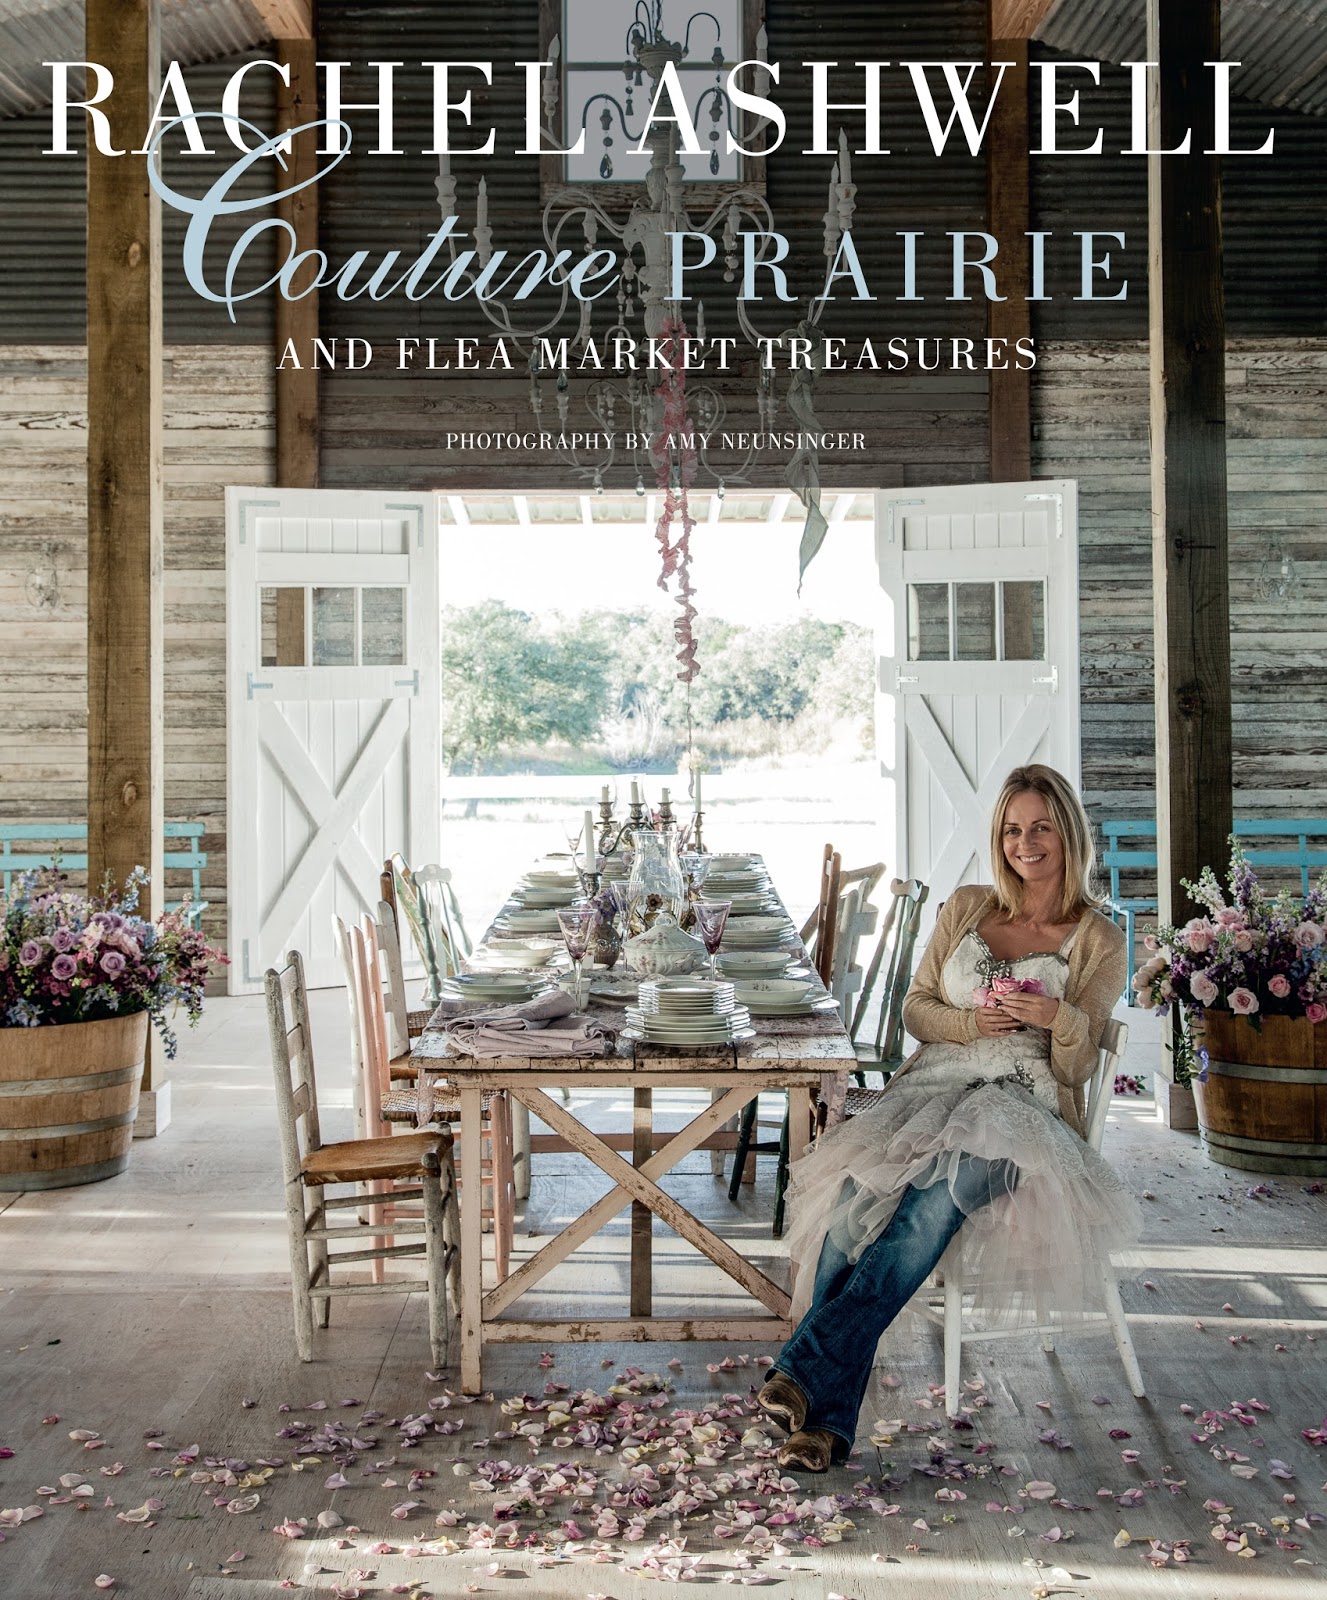 Rachel Ashwell Couture Prairie Book Review & A Book Giveaway!!!